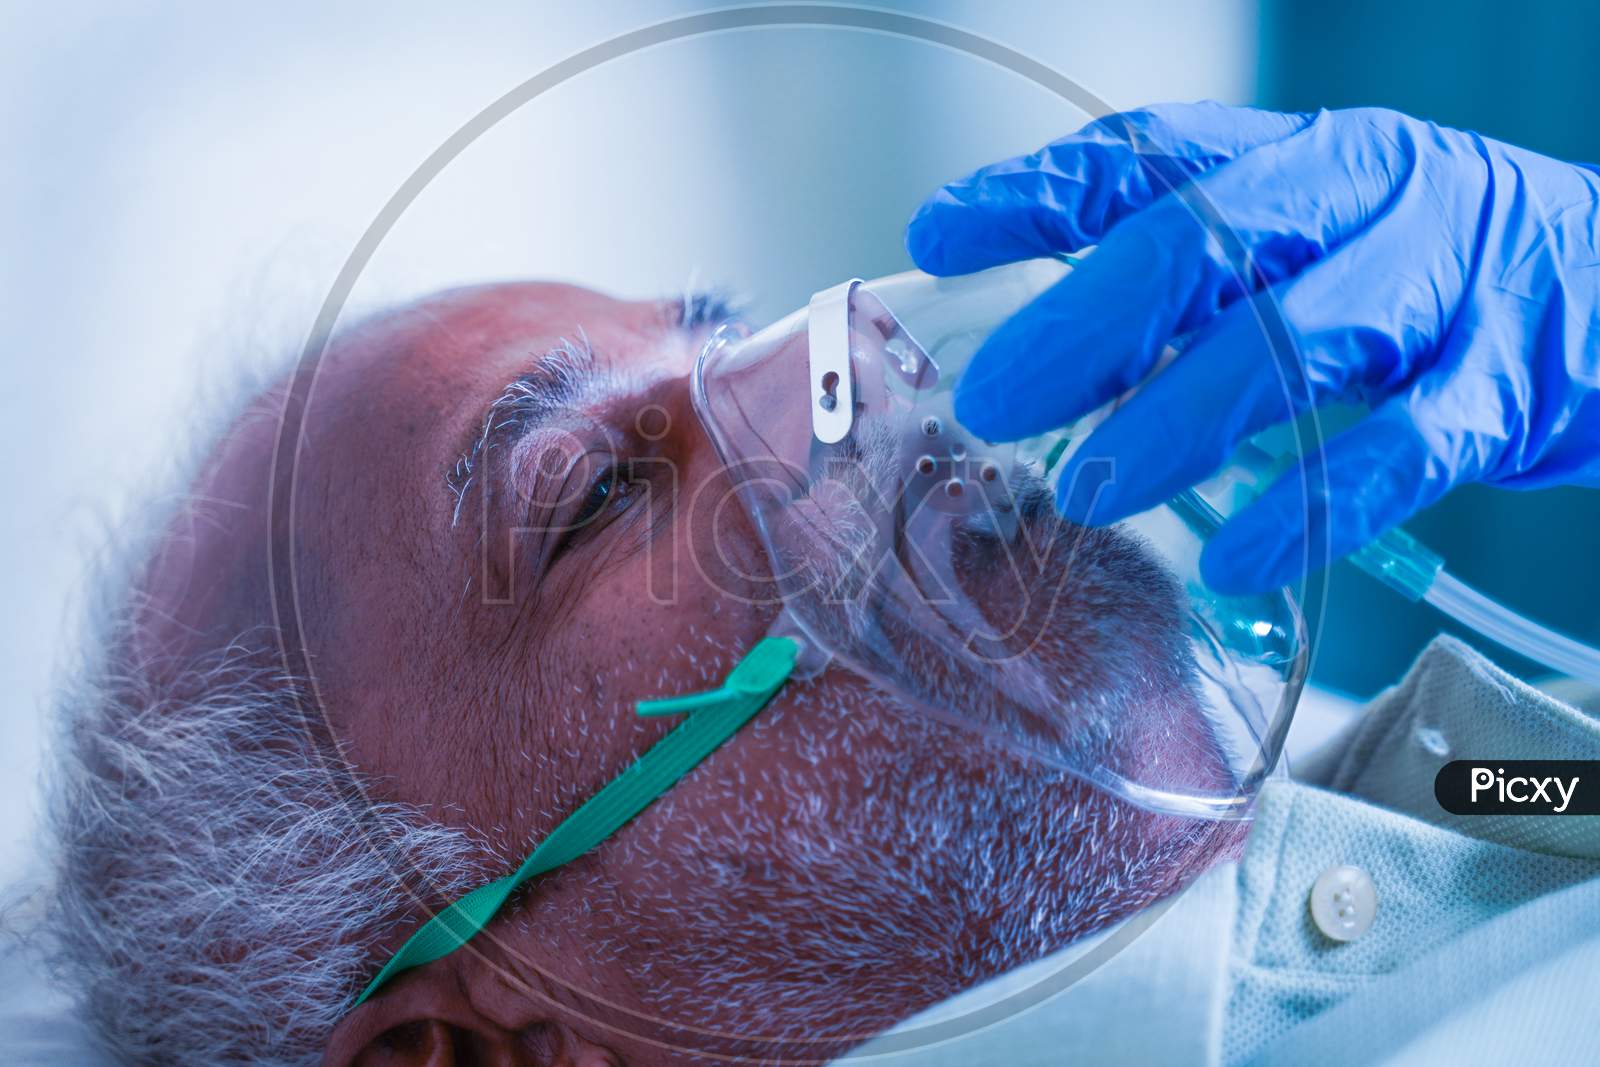 Close Up Shot, Doctor Helping By Adjusting Ventilation Oxygen Mask To Covid Infected Difficulty In Breathing Or Breathlessness To Patient At Hospital - Concept Of Dyspnea Due To Coronavirus Infection